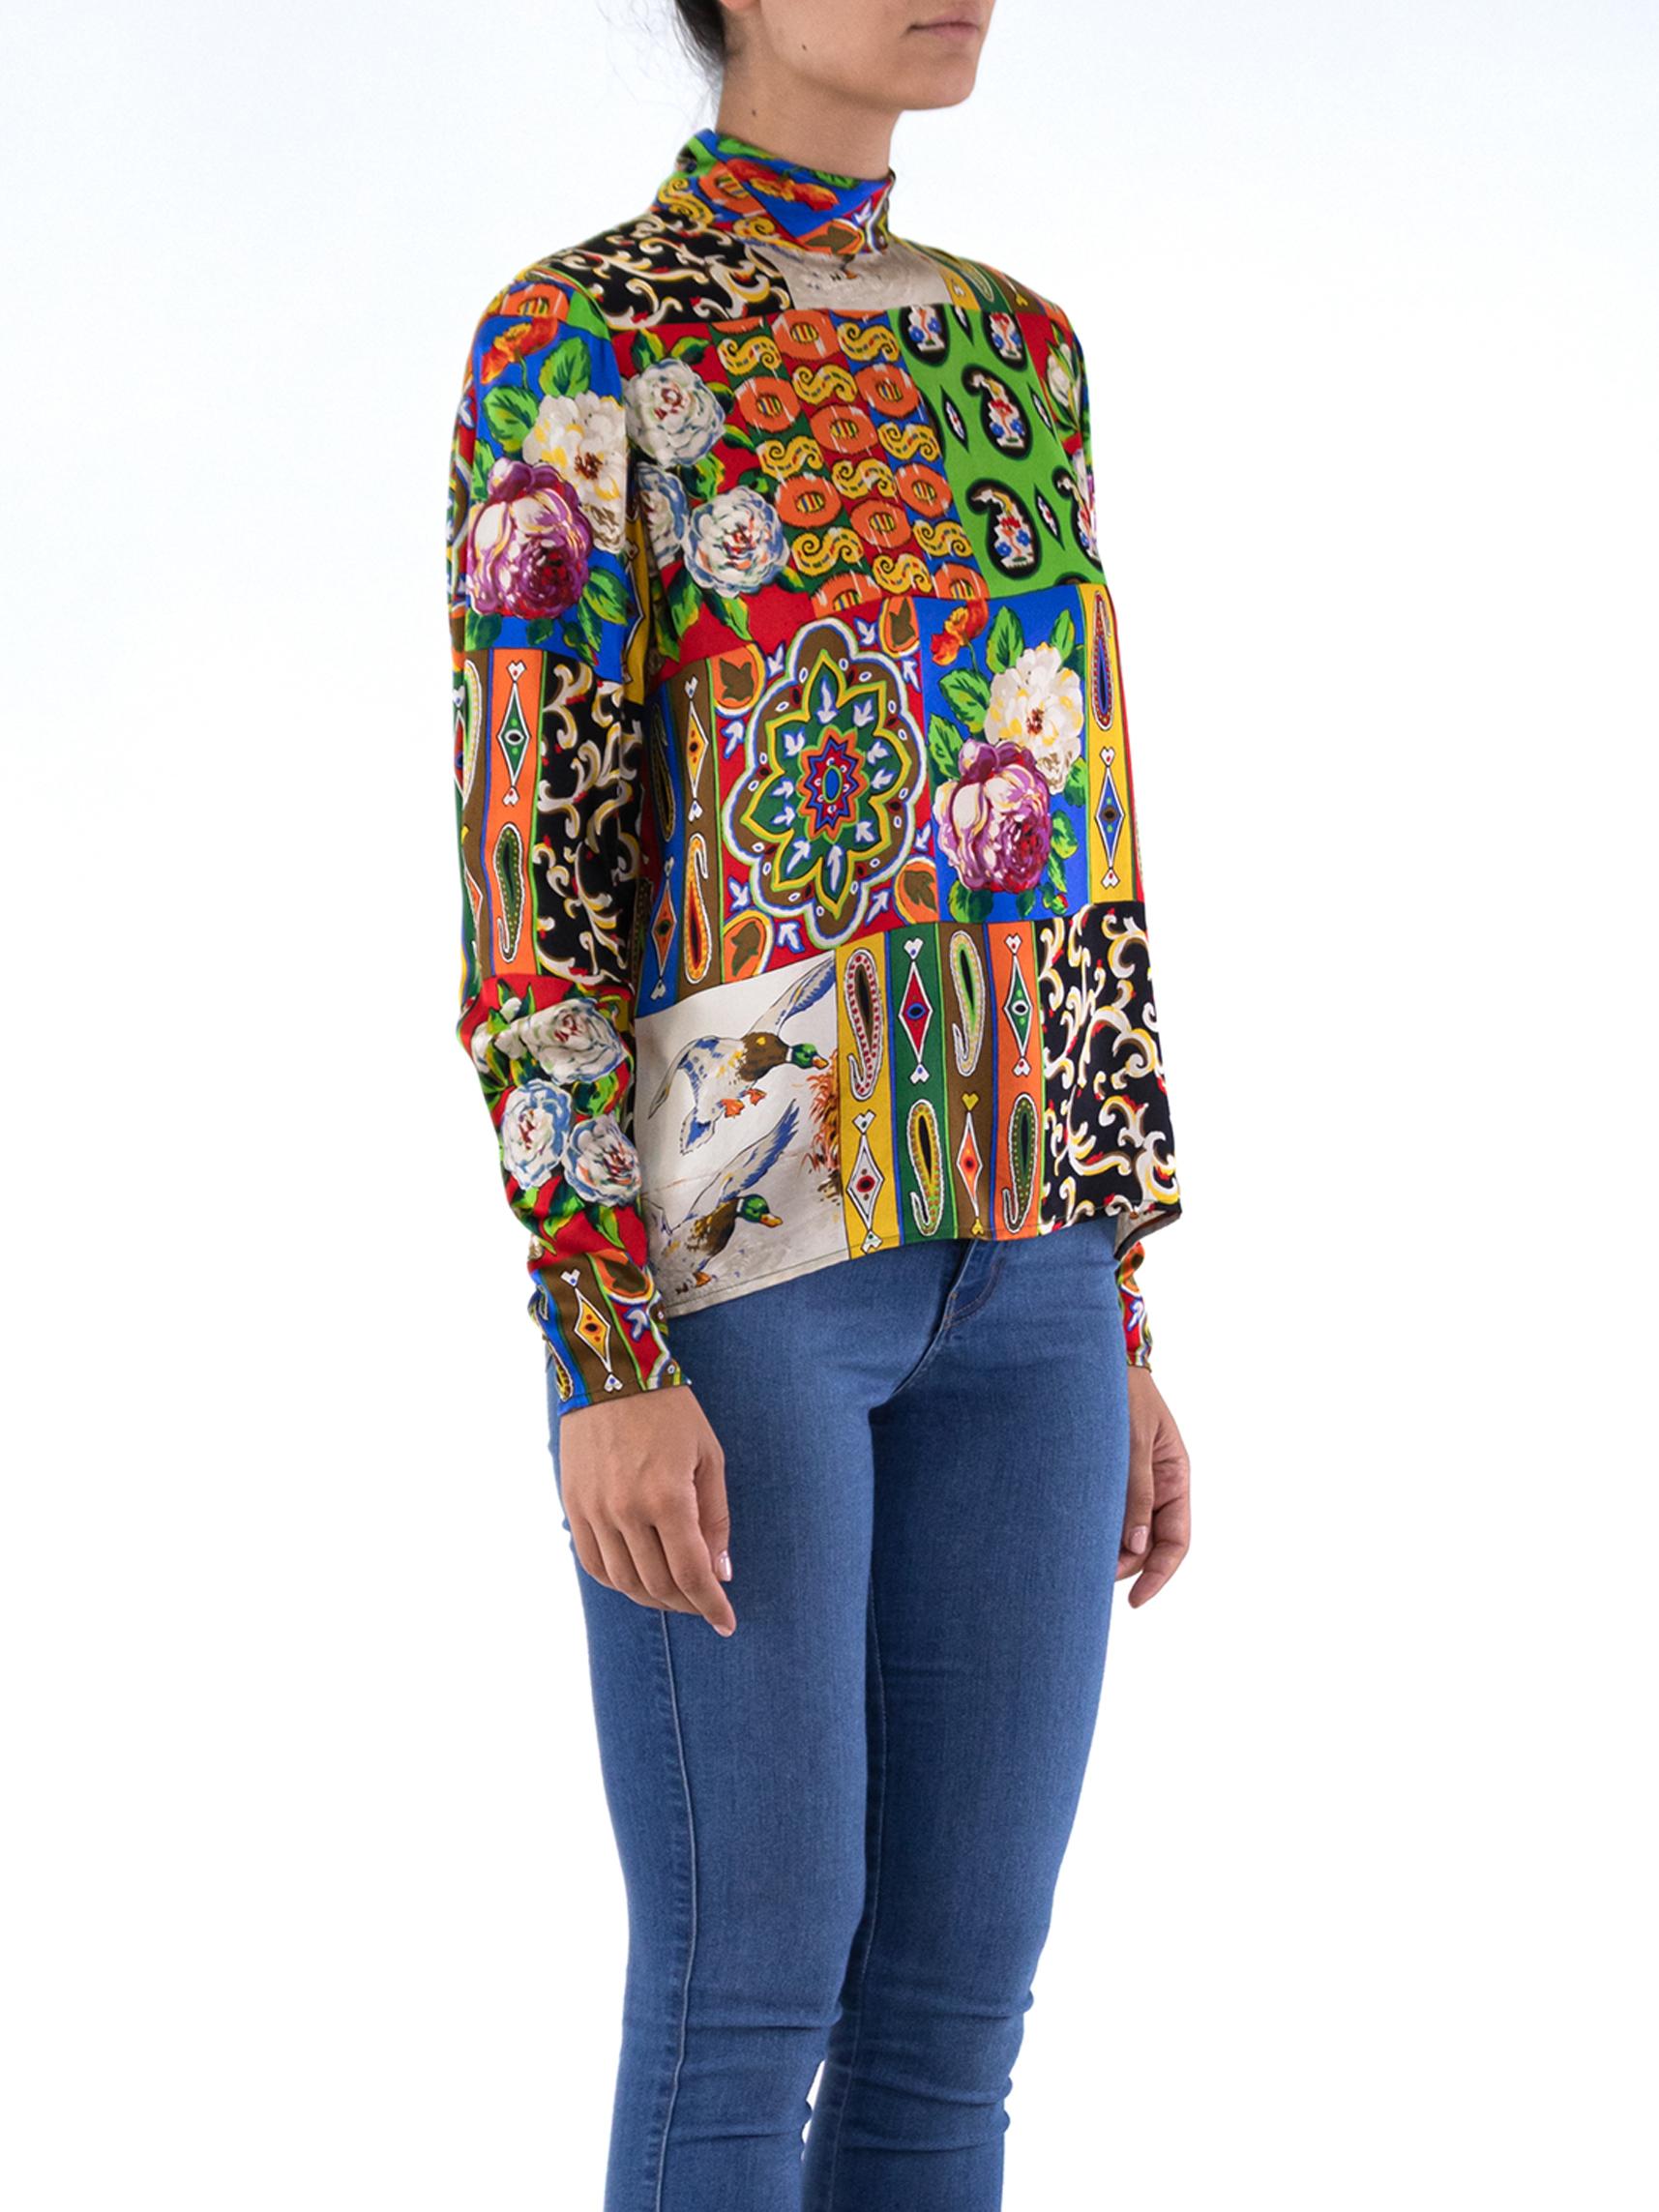 1980'S Floral Tile Print Blouse In Excellent Condition For Sale In New York, NY